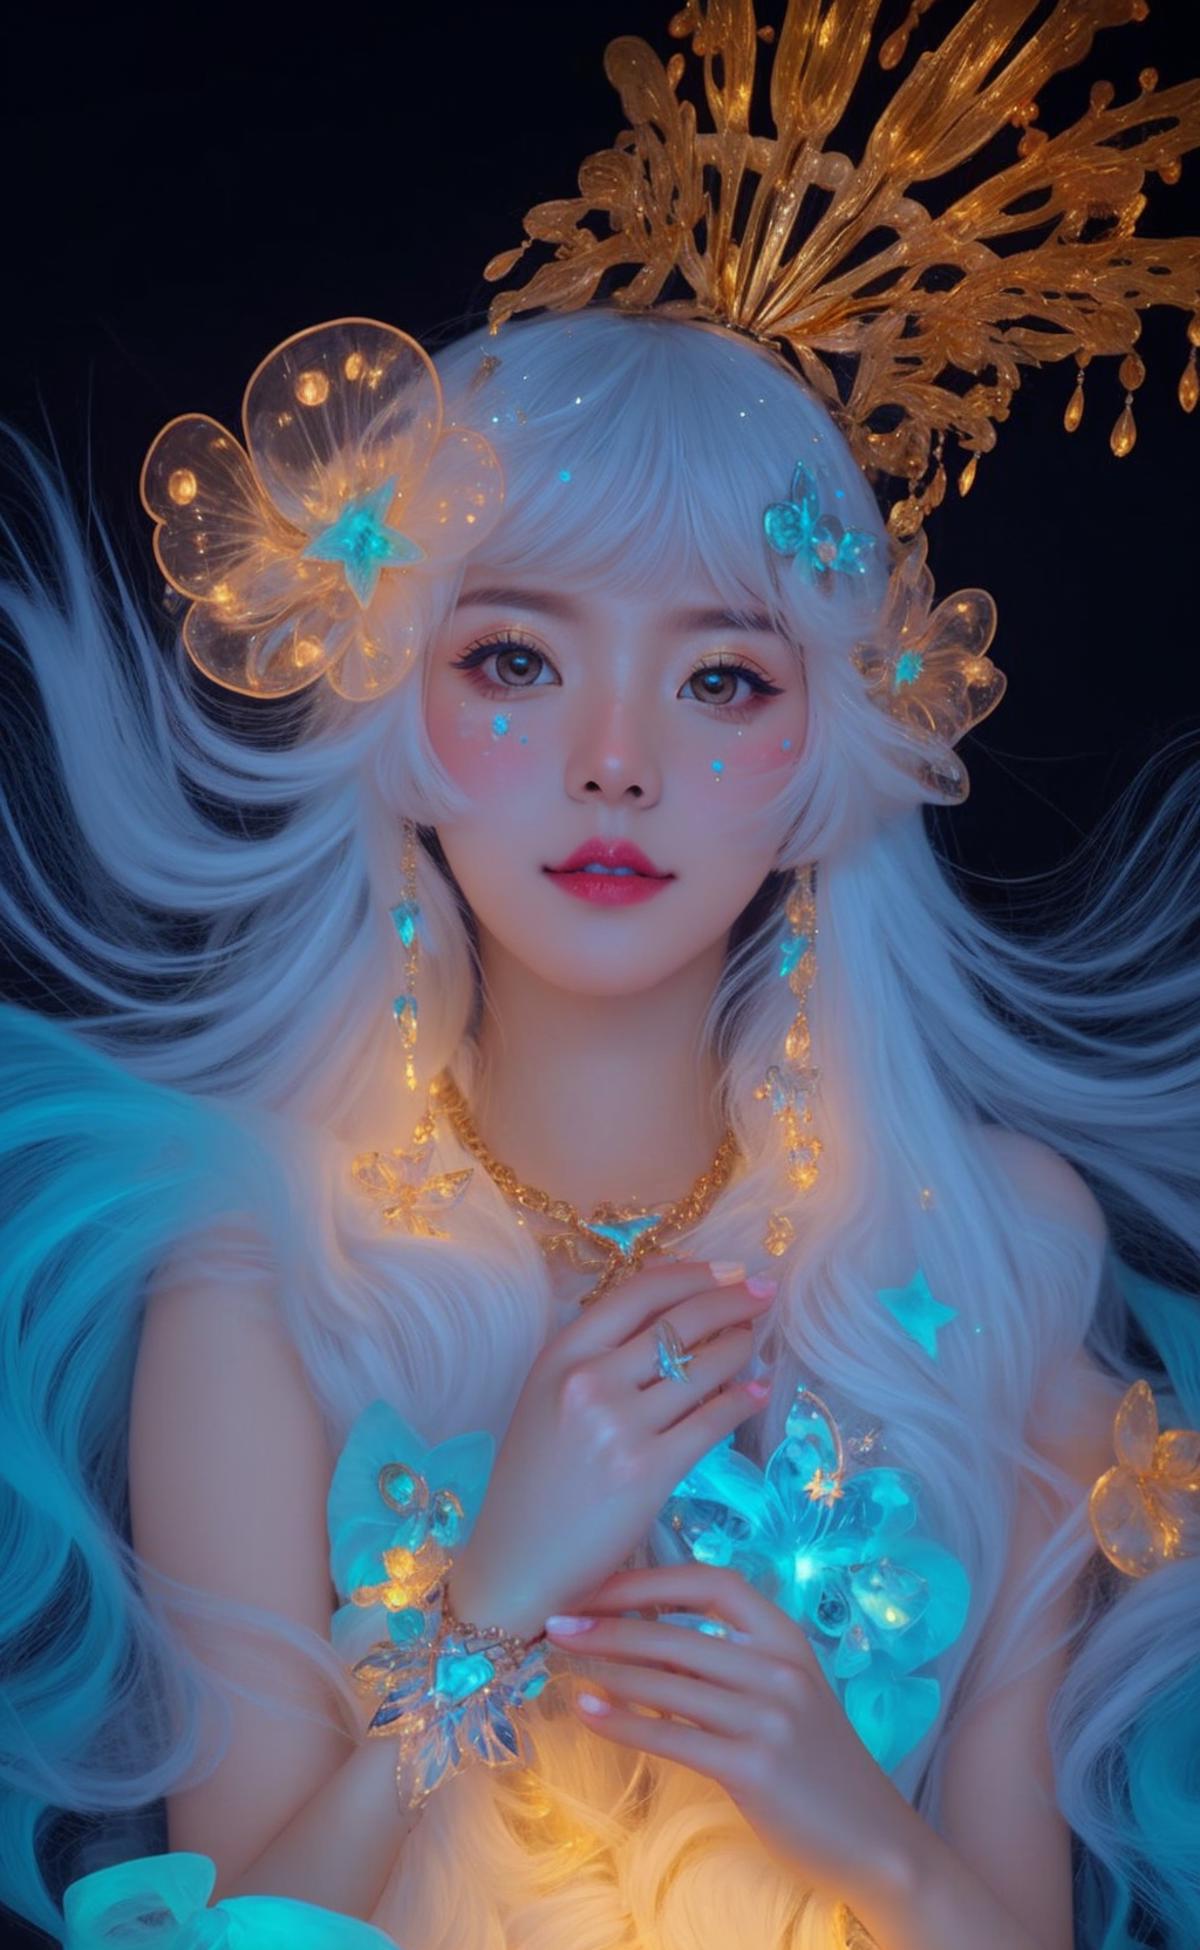 AI model image by TracQuoc